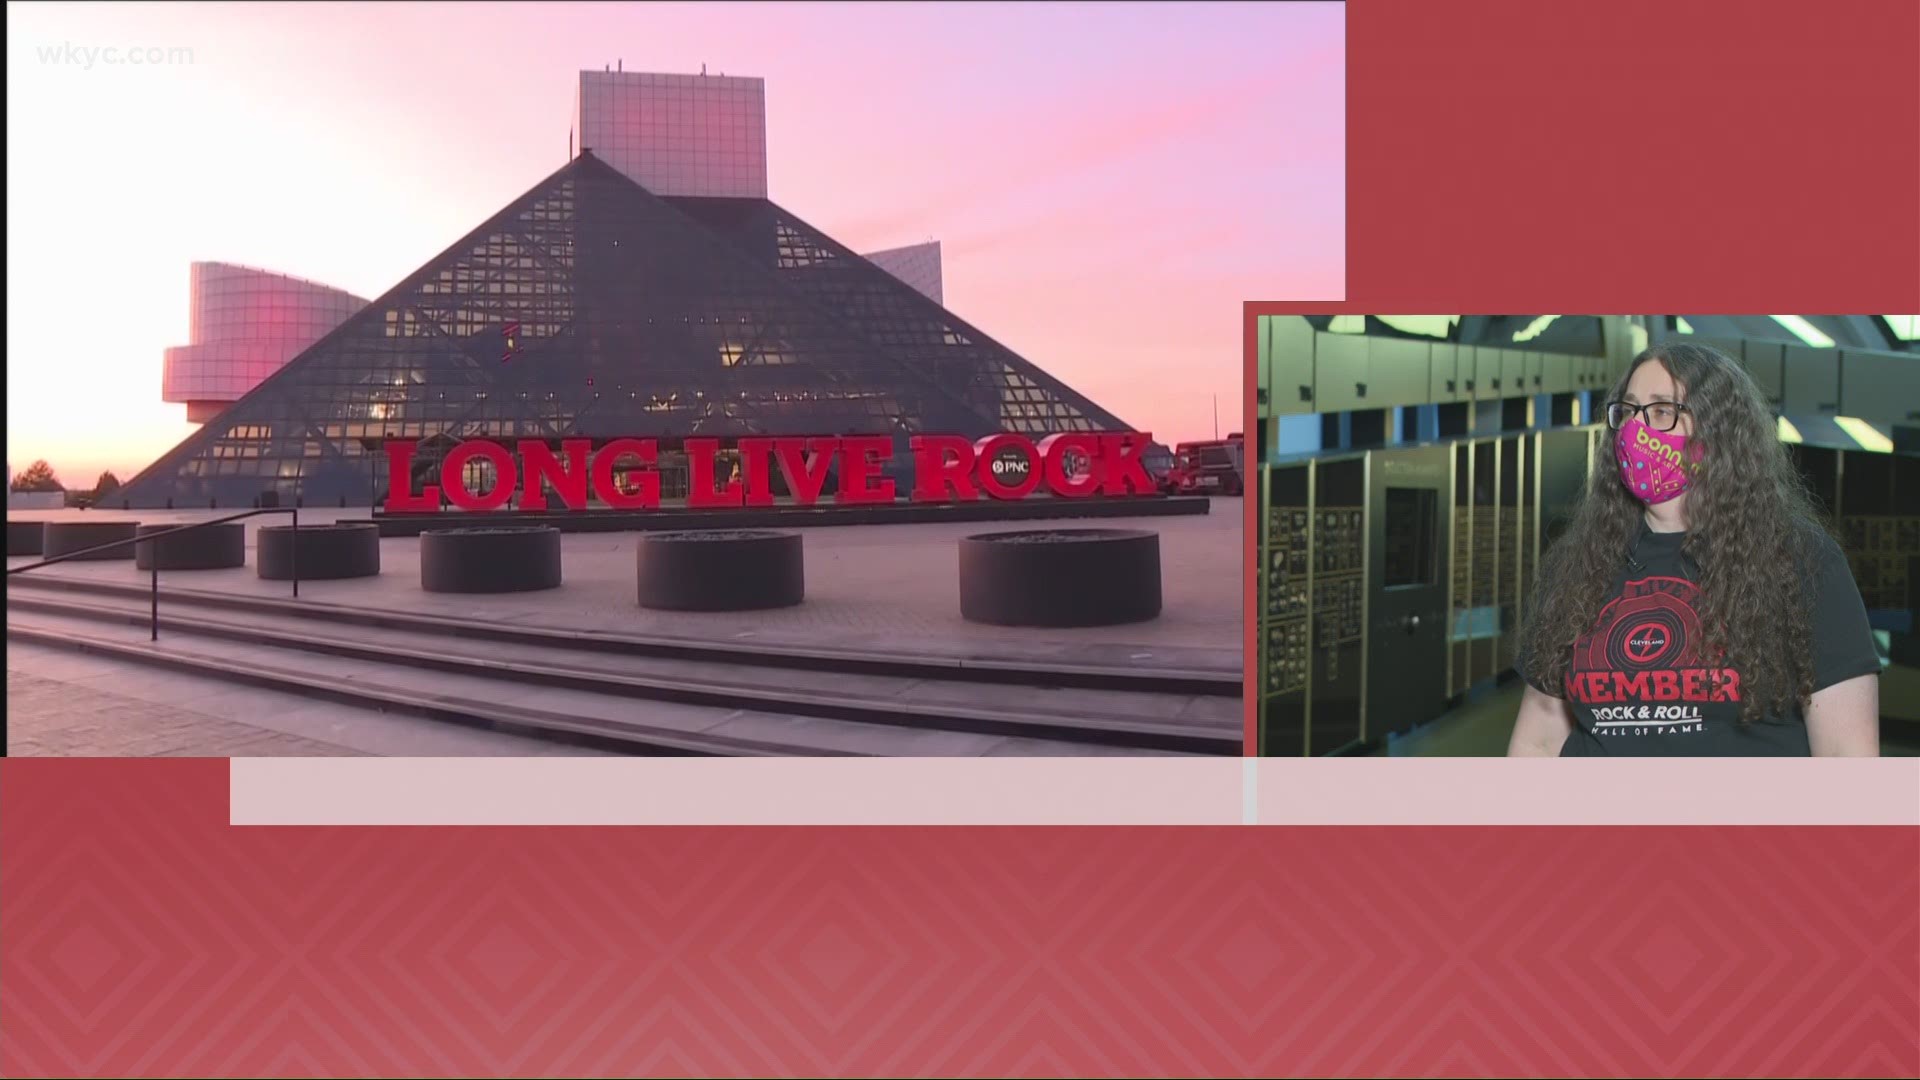 The Rock and Roll Hall of Fame in Cleveland is preparing to reveal the class of 2021 inductees.